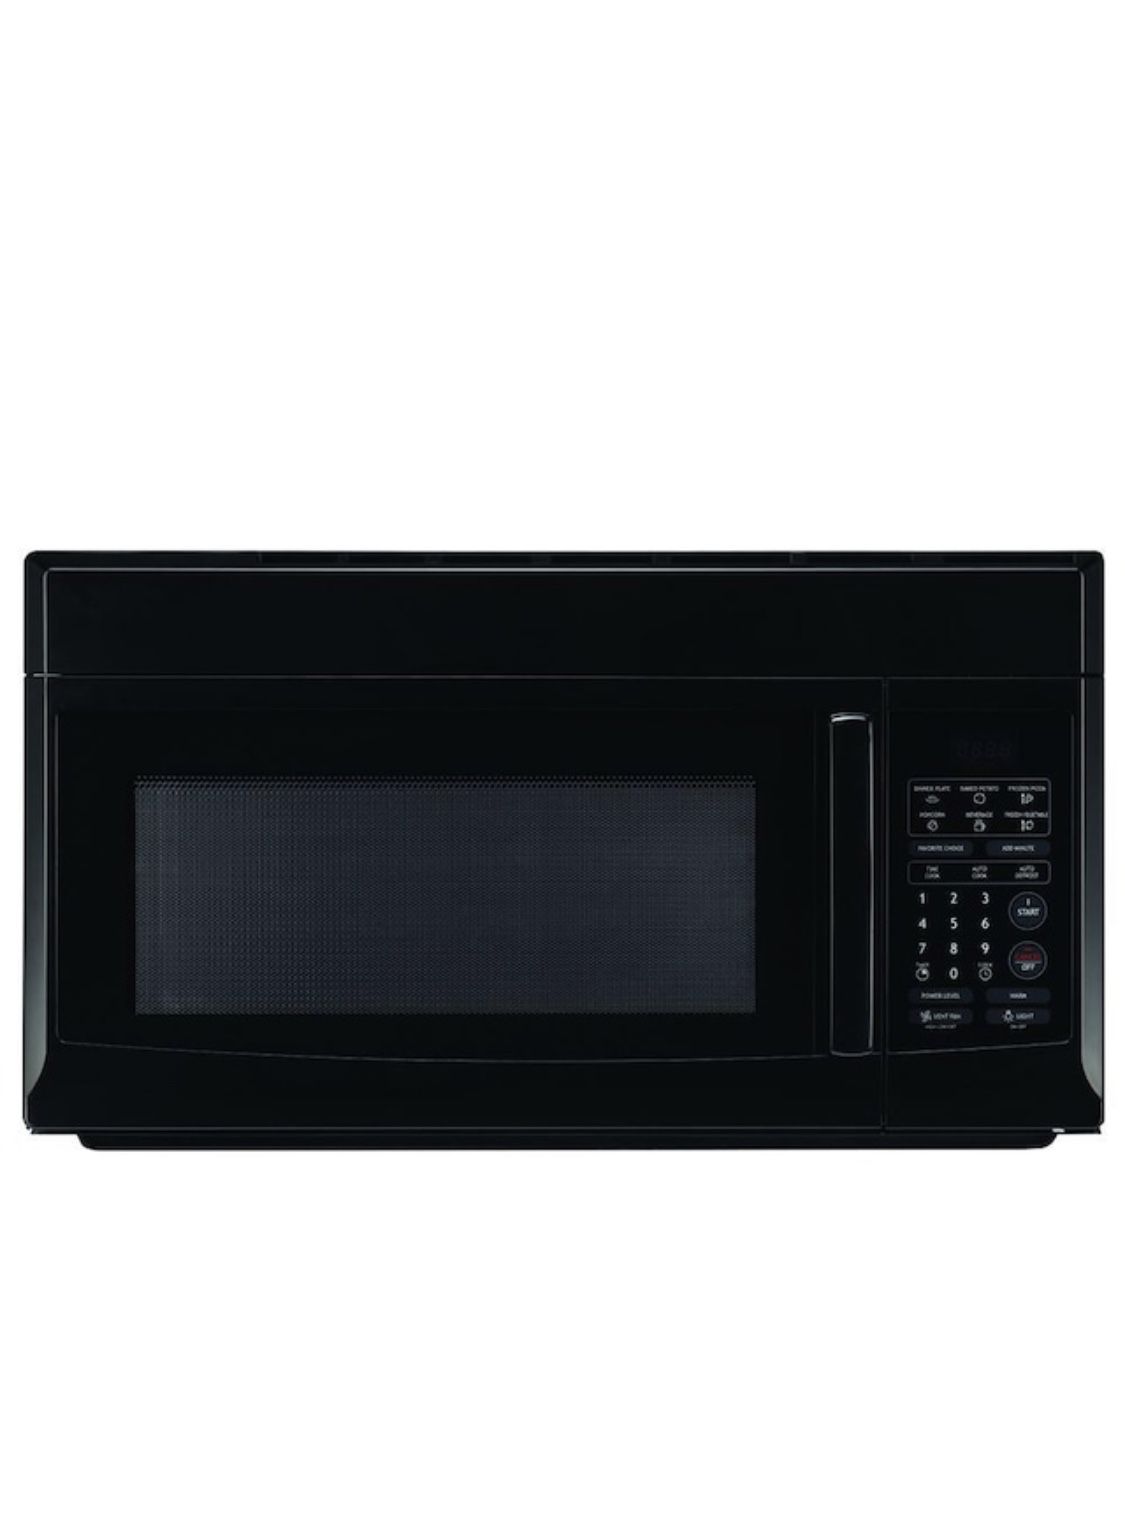  1.6 cu. ft. Over the Range Microwave in Black